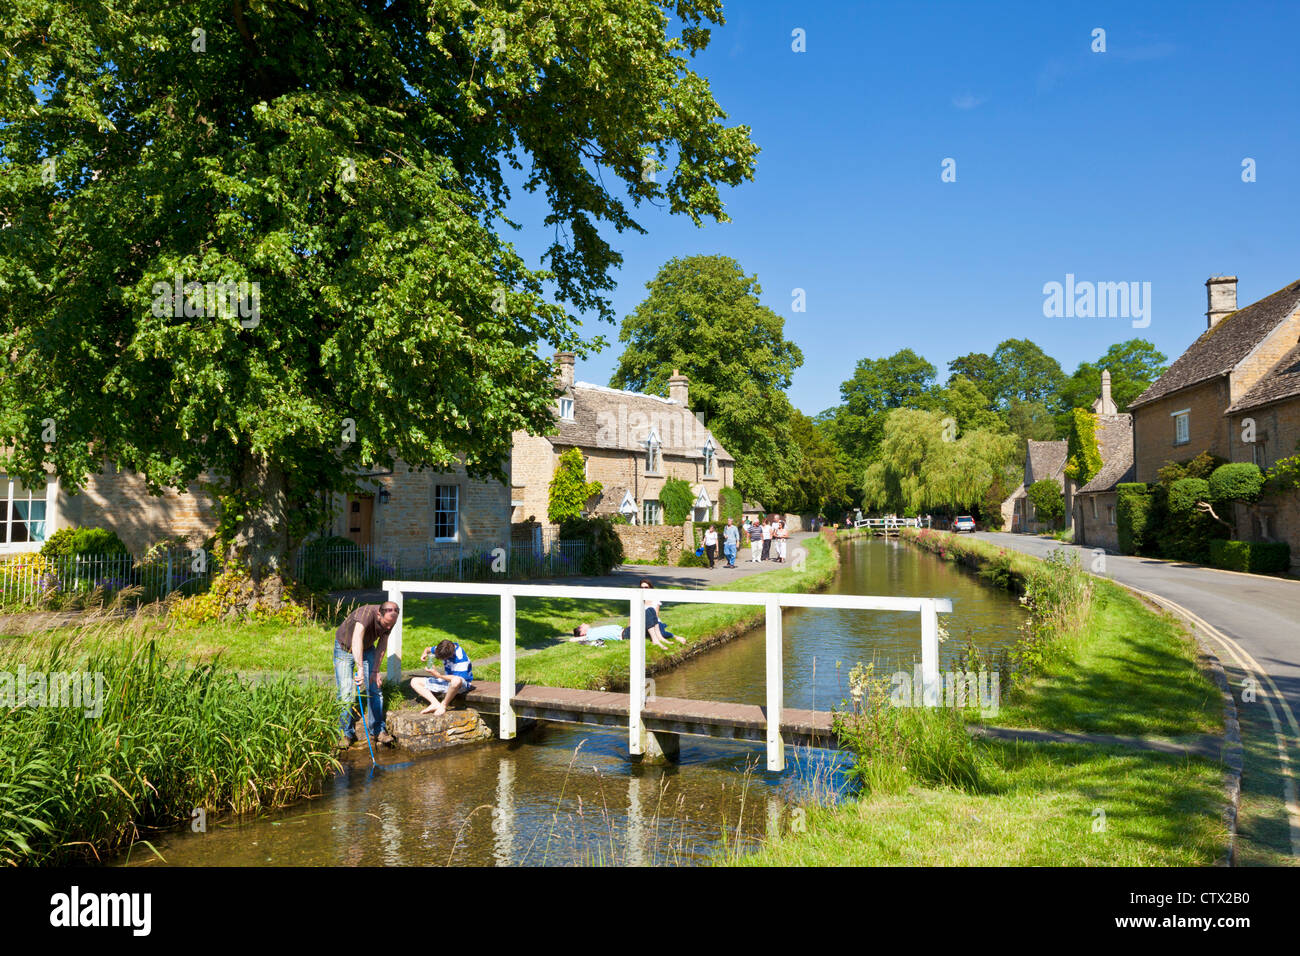 Cotswolds village of Lower Slaughter with the River Eye meandering through the village the cotswolds Gloucestershire England UK GB Europe Stock Photo